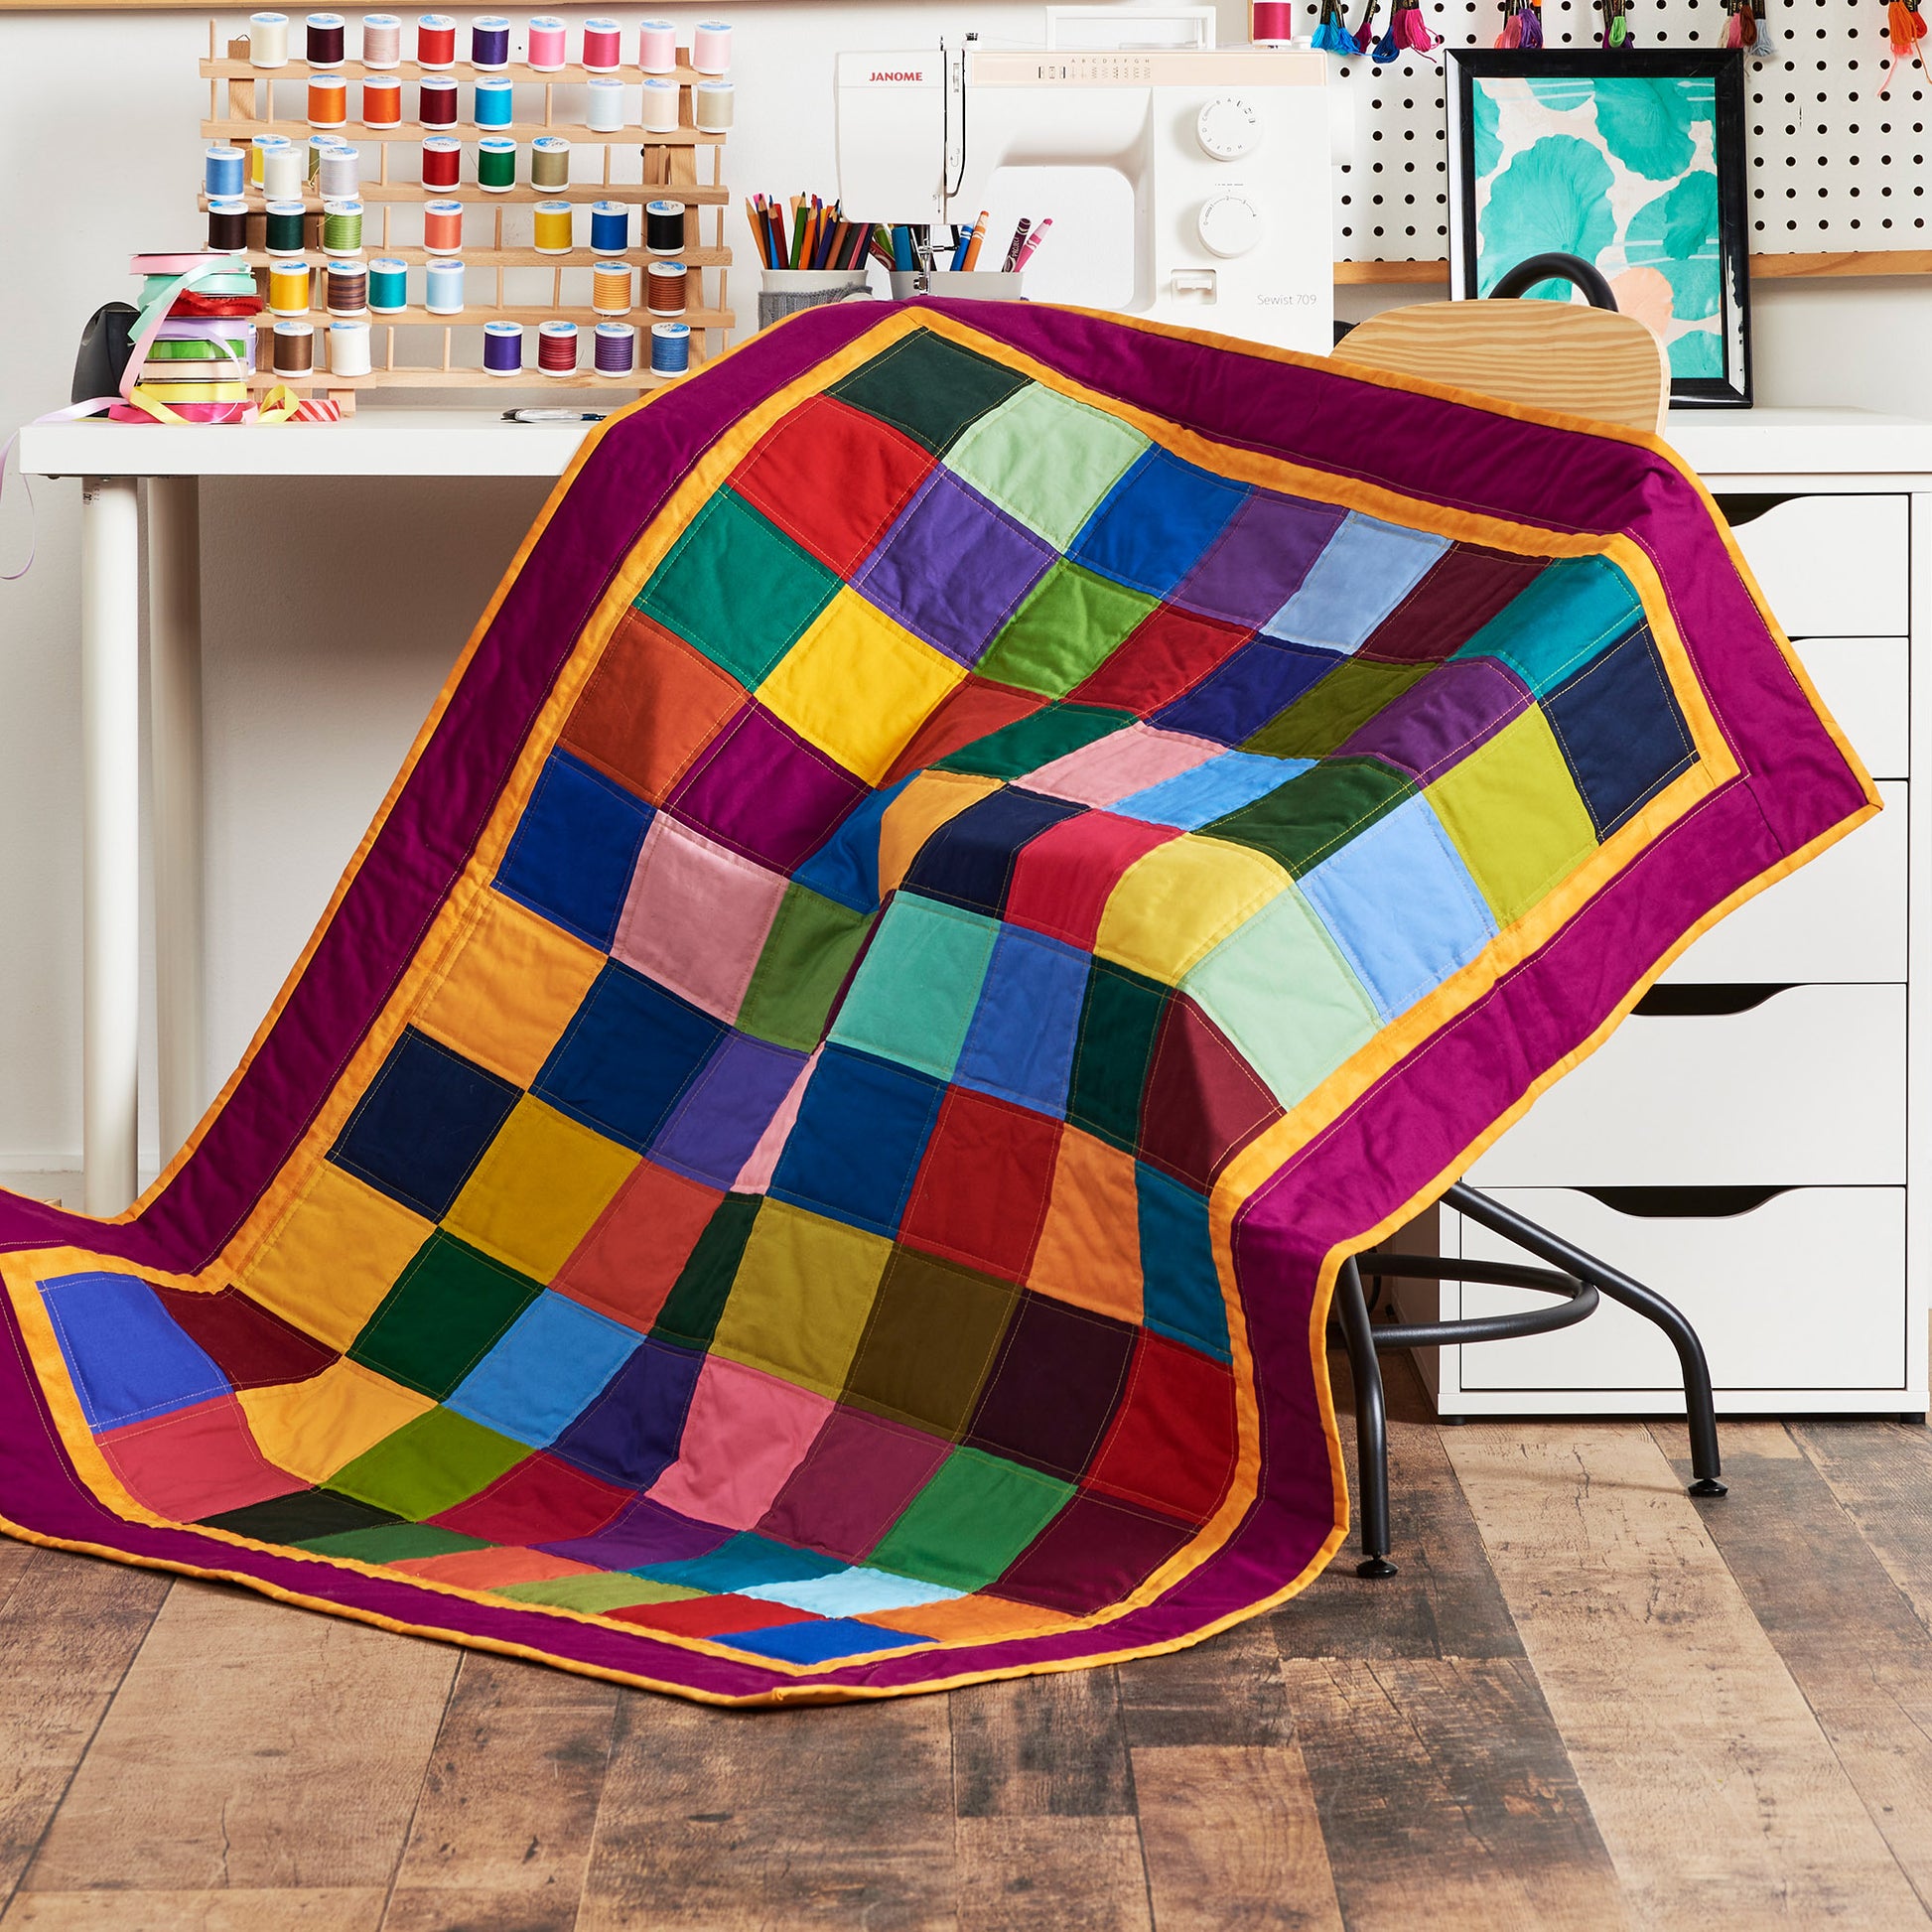 Free Coats & Clark Quilting Basic Square Quilt Pattern